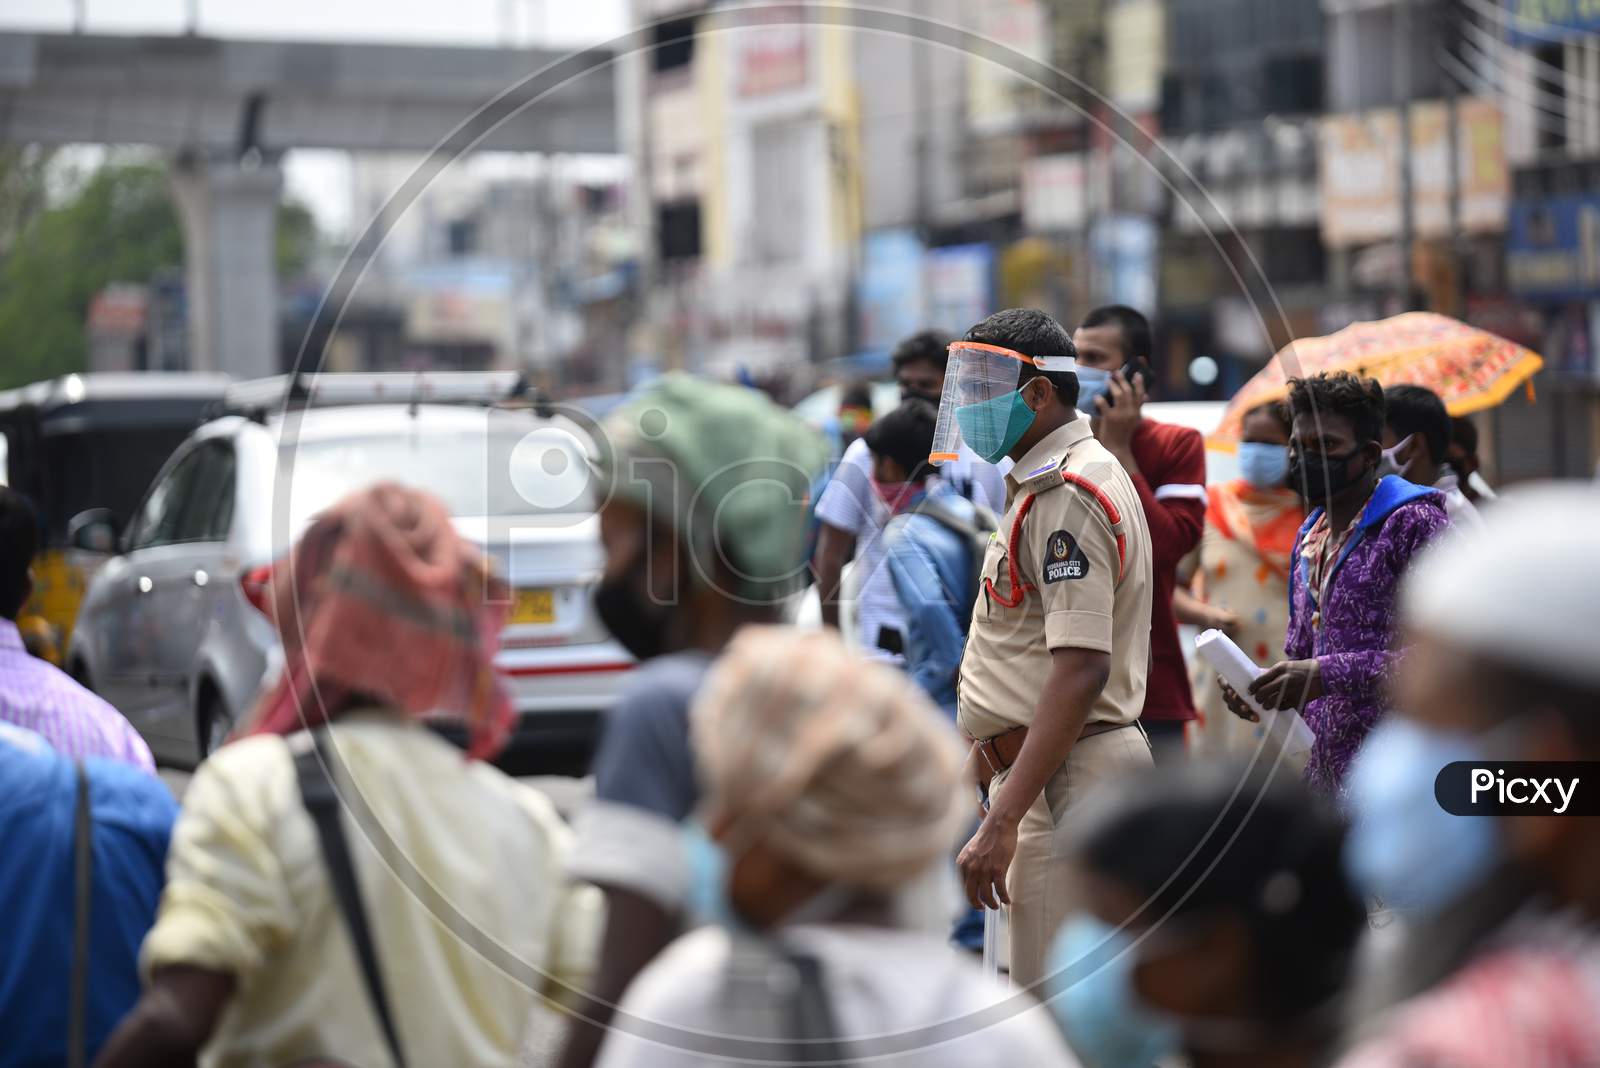 A Hyderabad City Police officer wearing a face shield as a protective measure to prevent CoronaVirus, June 1, 2020, Hyderabad